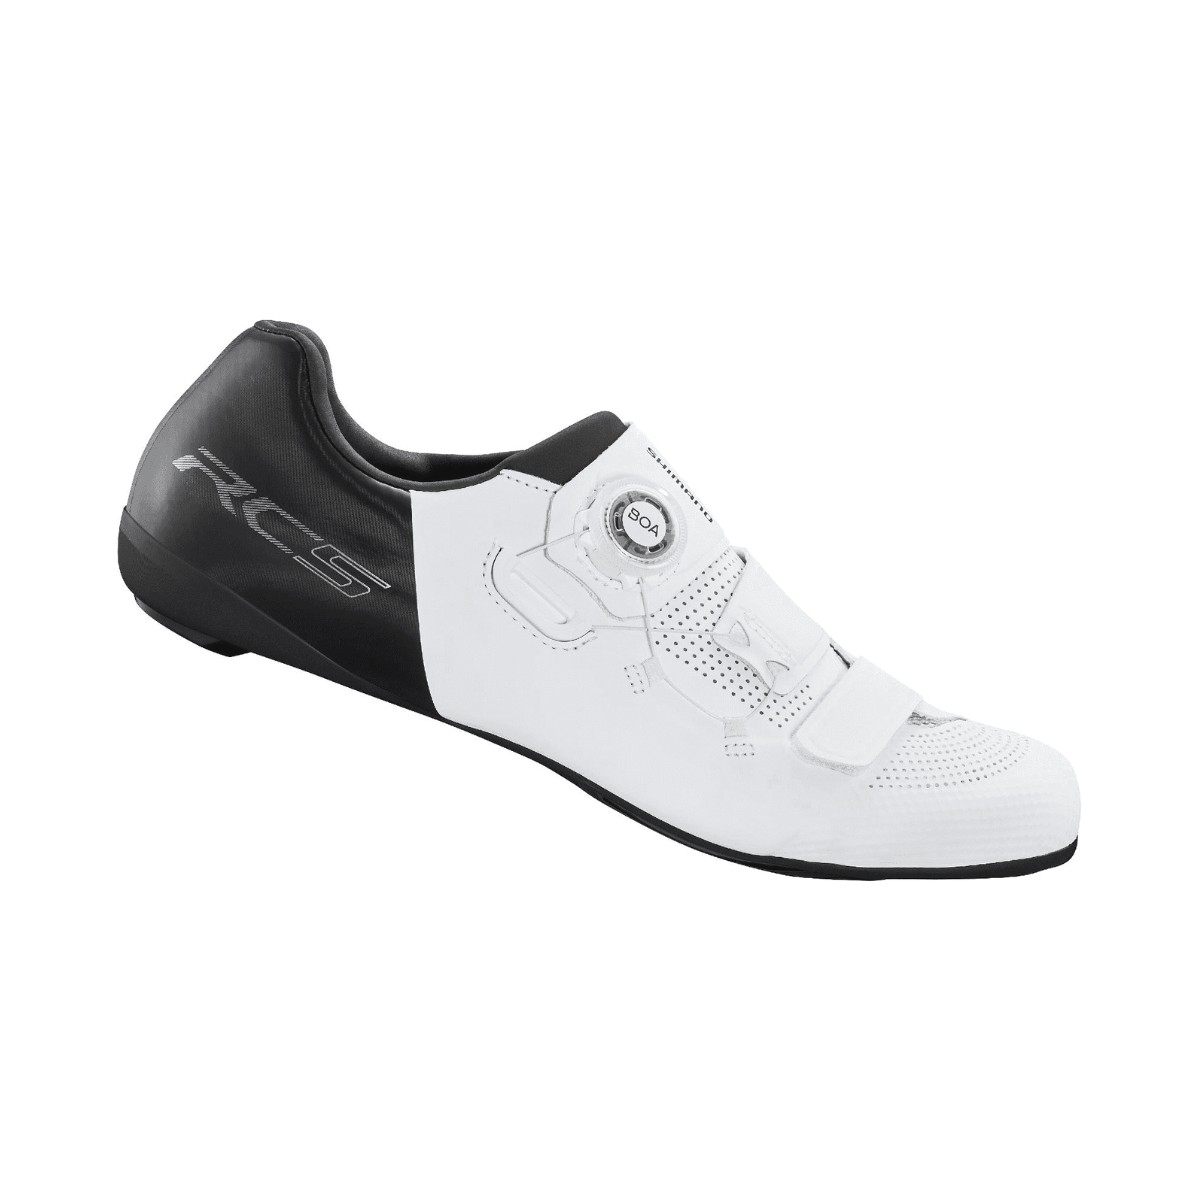 Chaussures Shimano RC502 Blanches